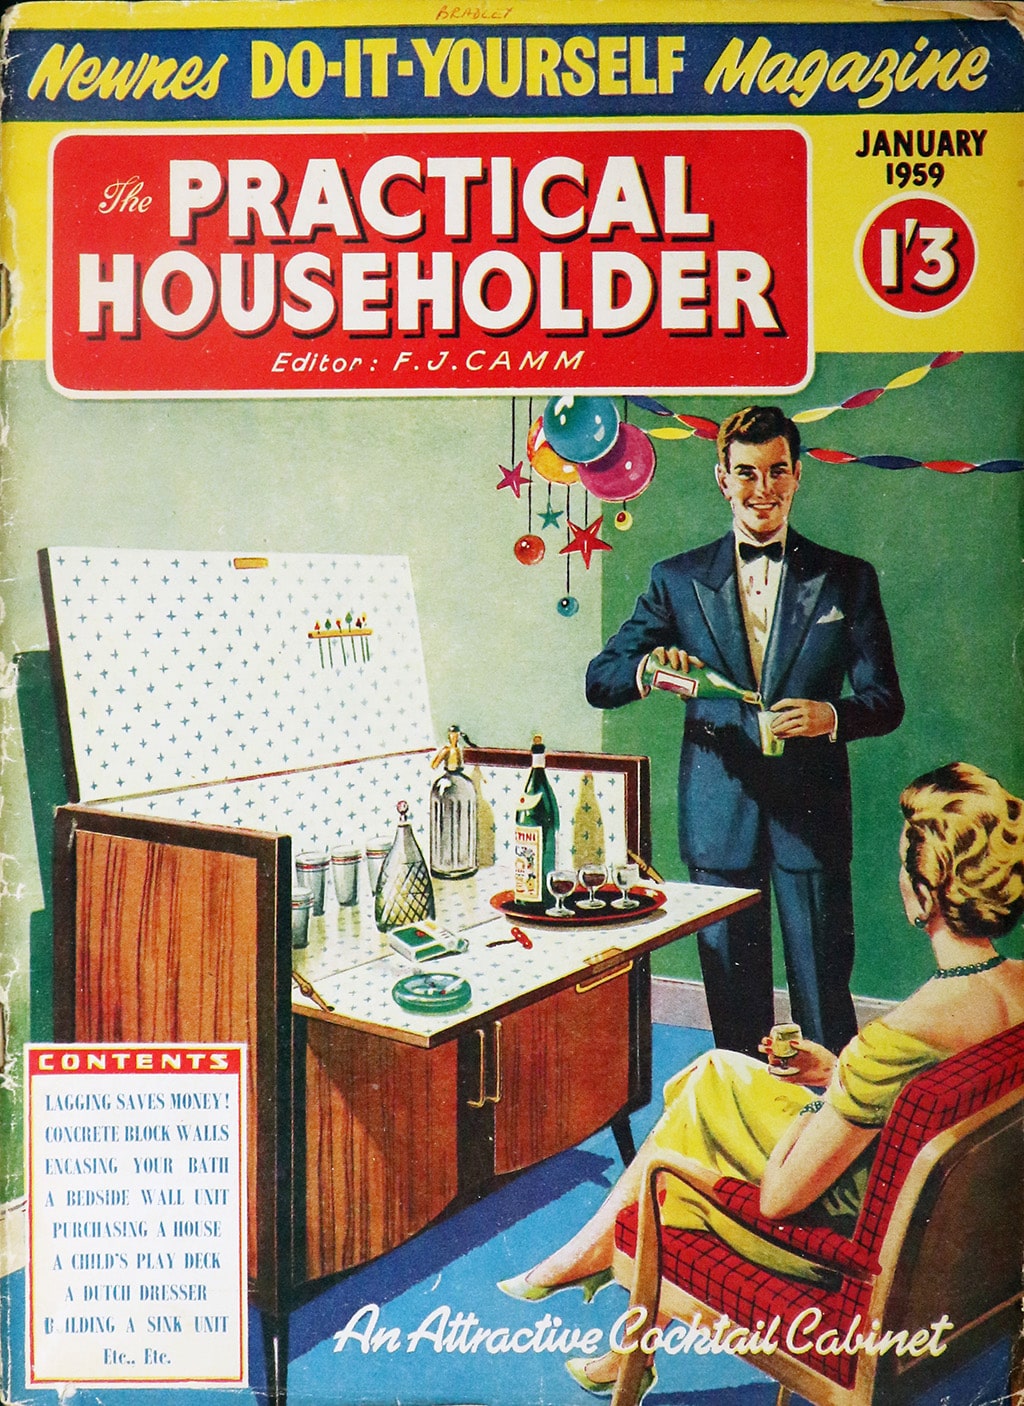 The Practical Householder front cover. It shows a man, standing, dressed in a suit pouring a drink from a bottle he took from a cocktail cabinet. A woman in a dress sits in a chair opposite him.